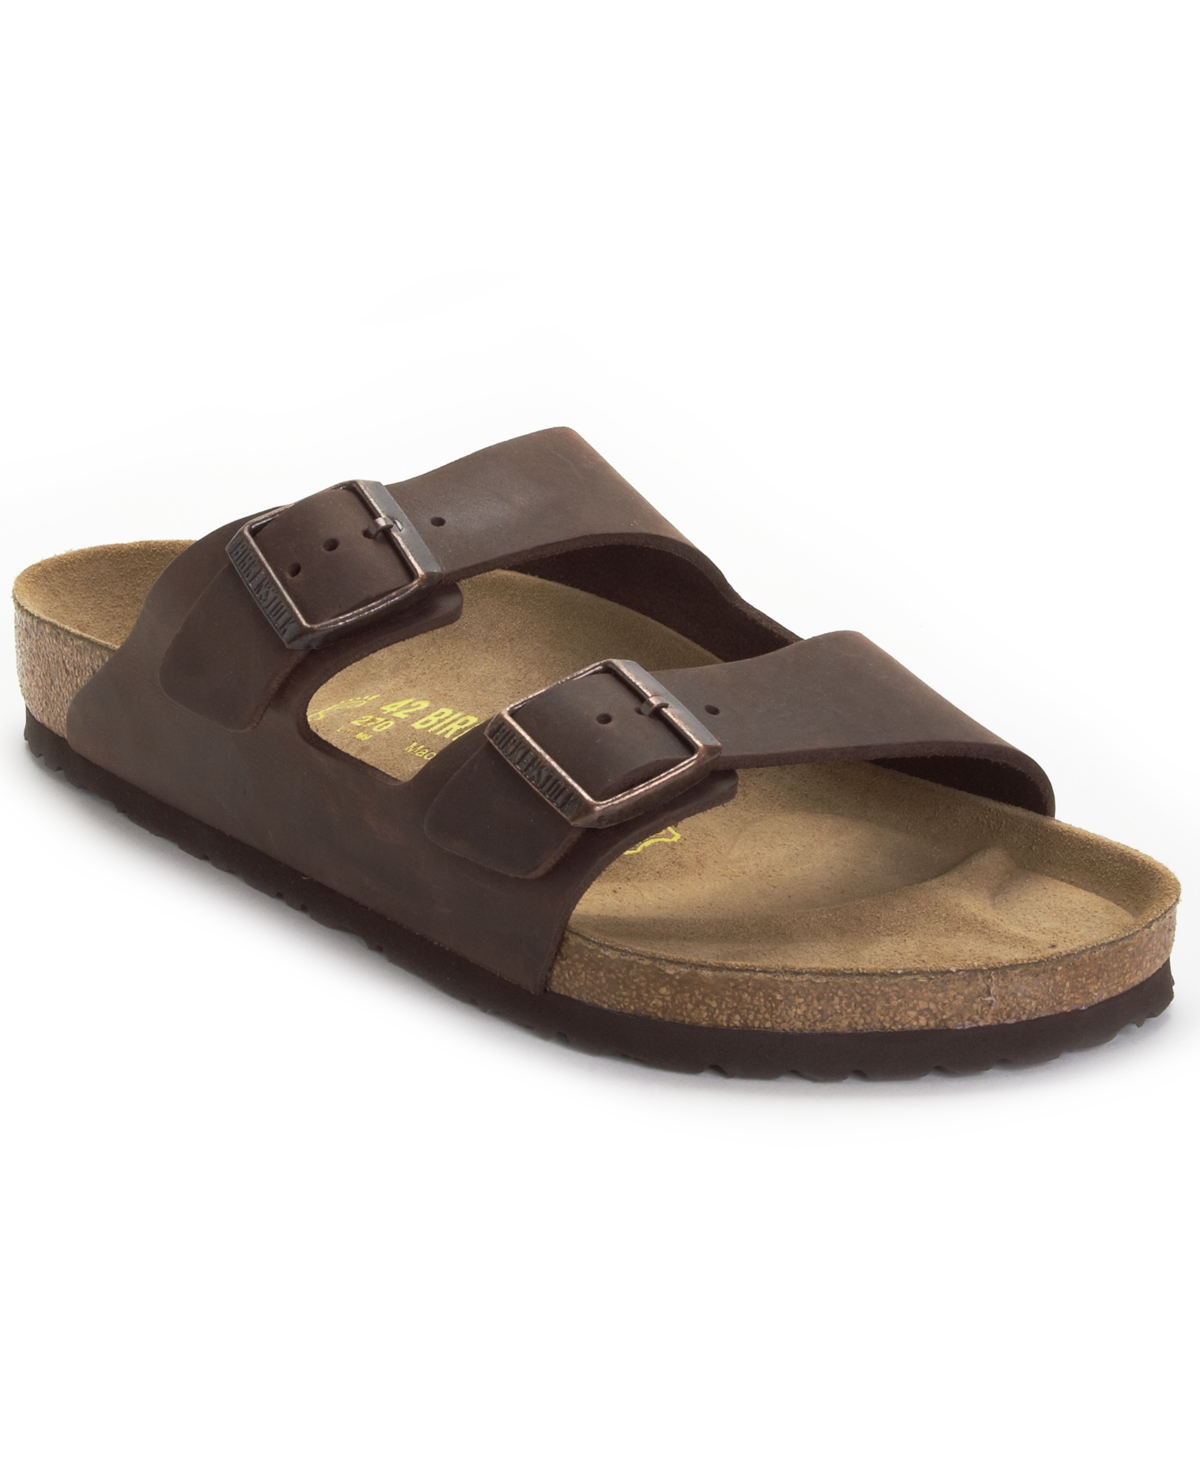 Men's Arizona Essentials Oiled Leather Two-Strap Sandals from Finish Line - Brown